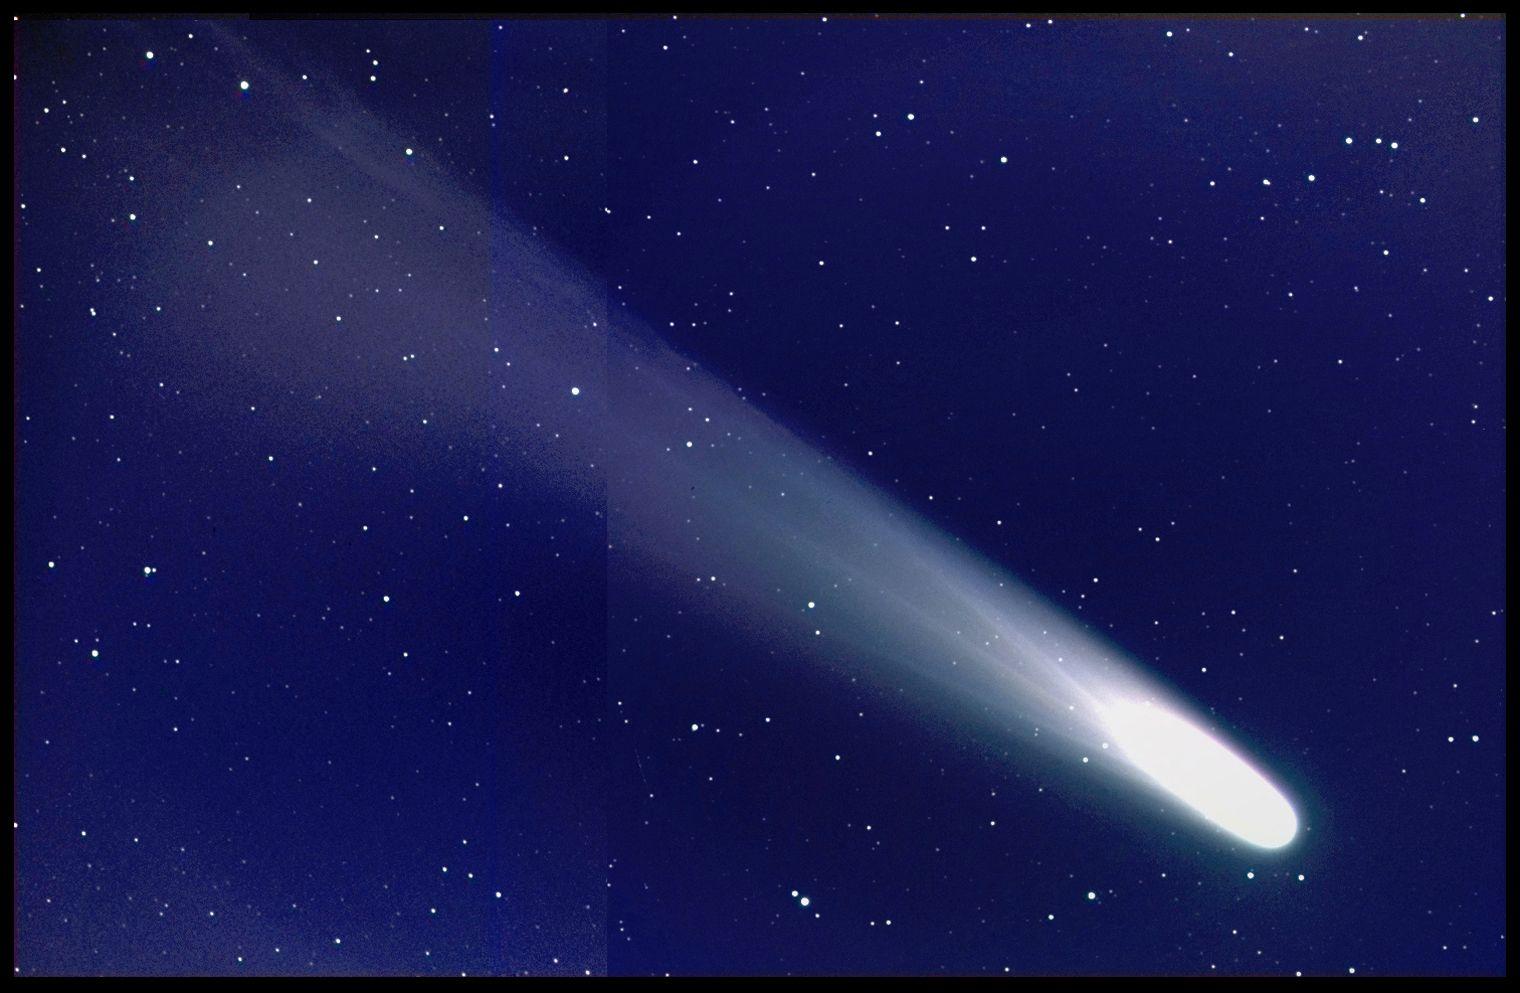 HD Comet Wallpaper and Photo. HD Space Wallpaper